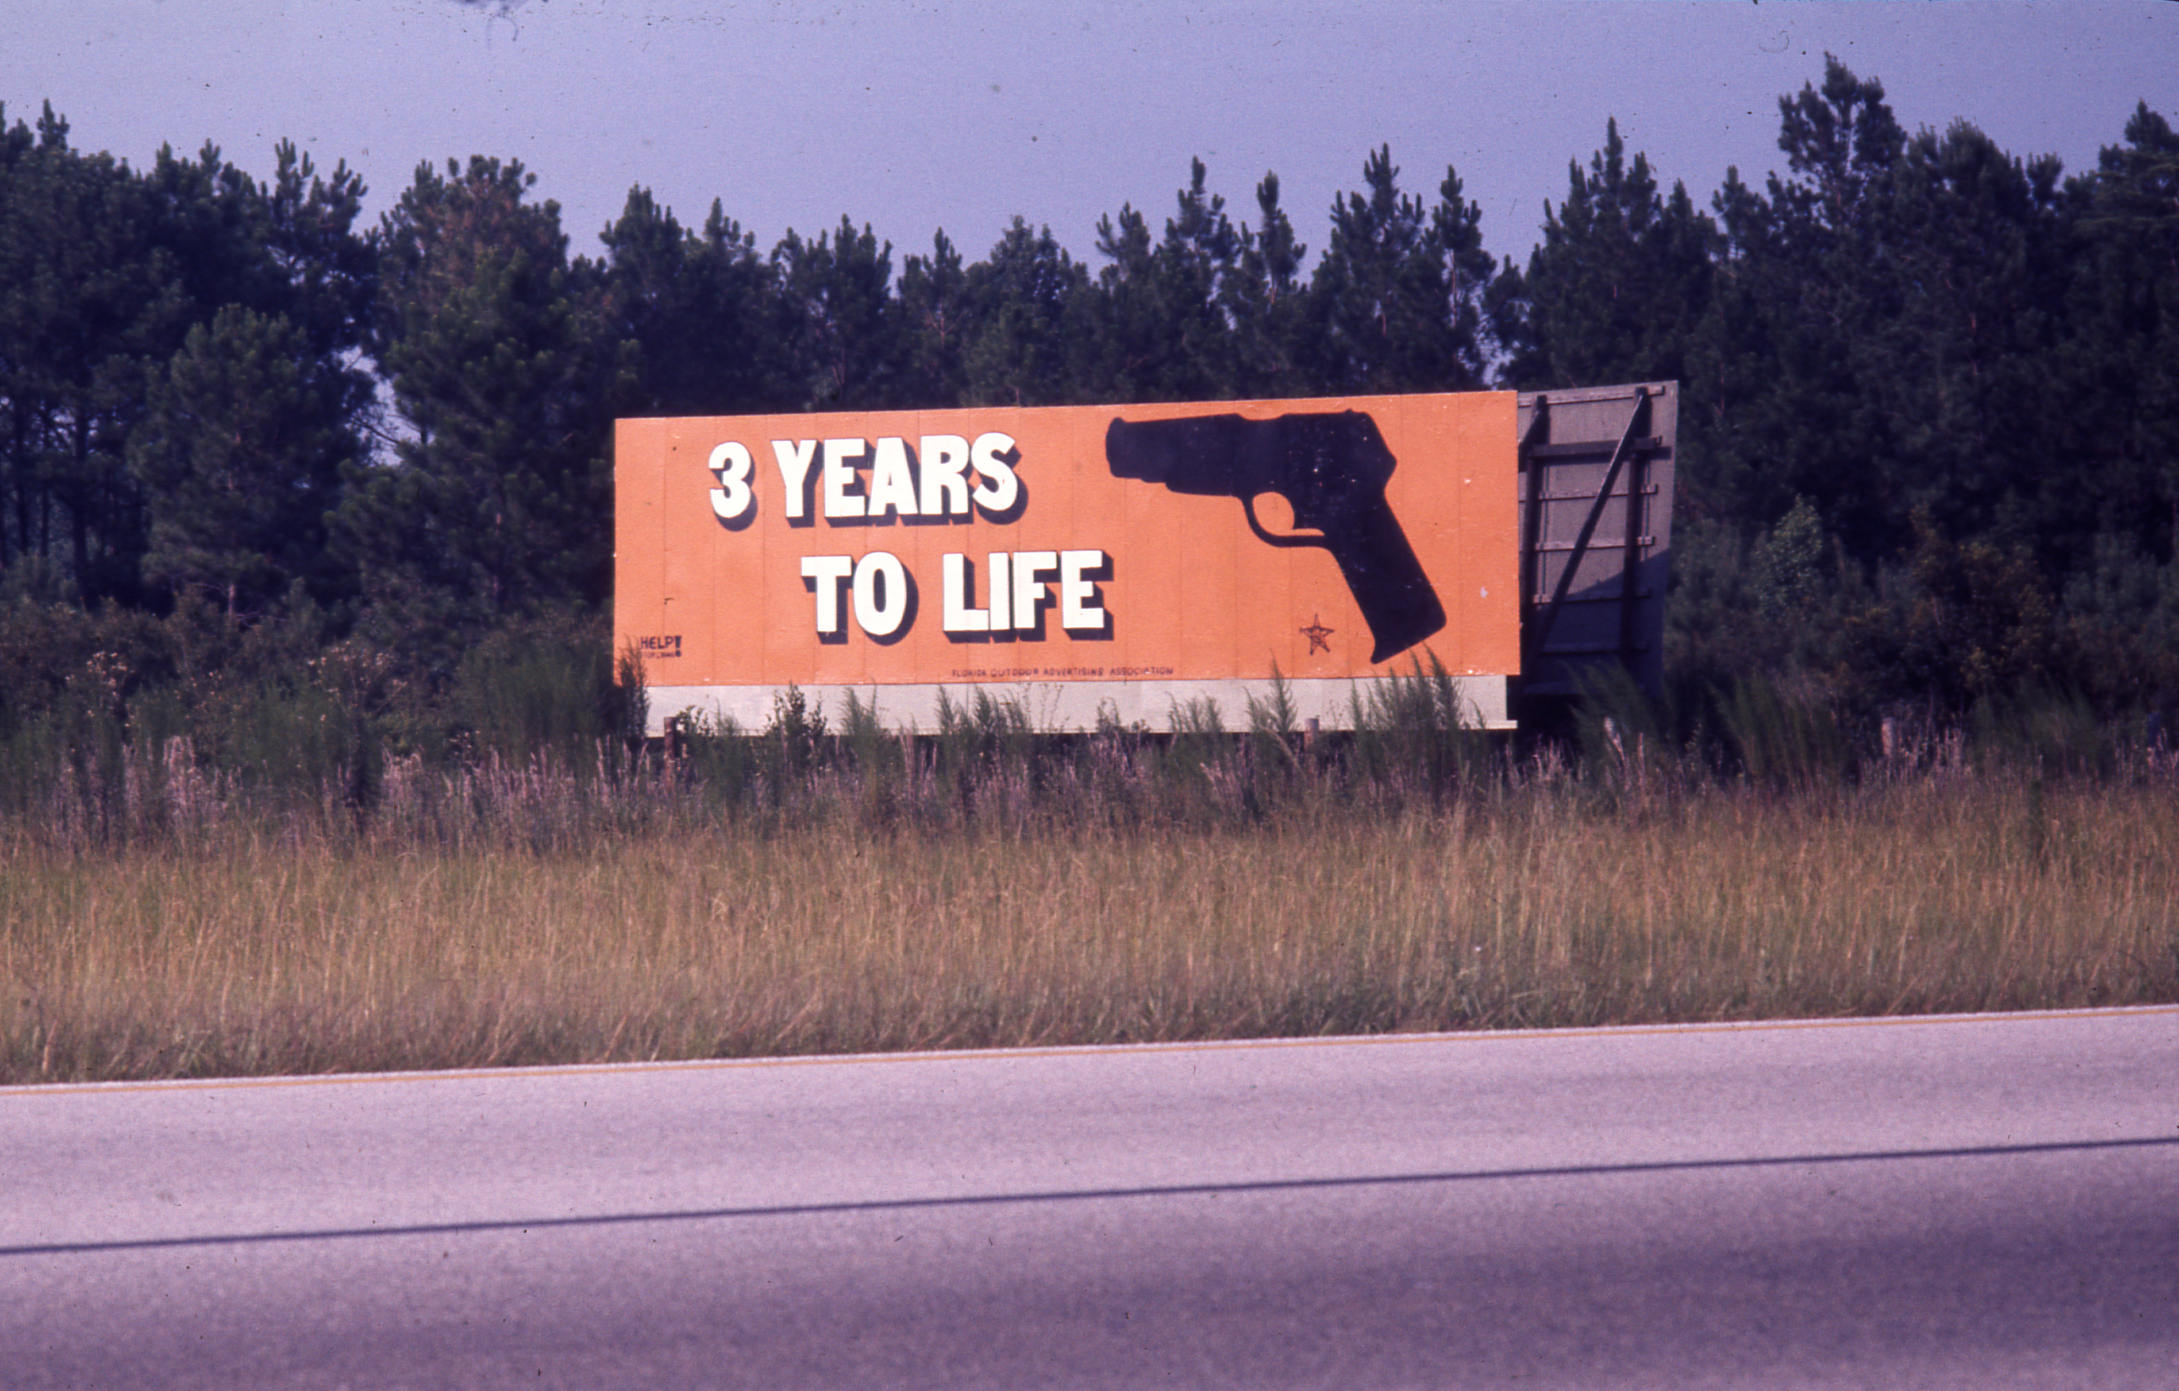 Slide 2: A picture of a billboard advertising '3 Years to Life' next to a drawing of a gun